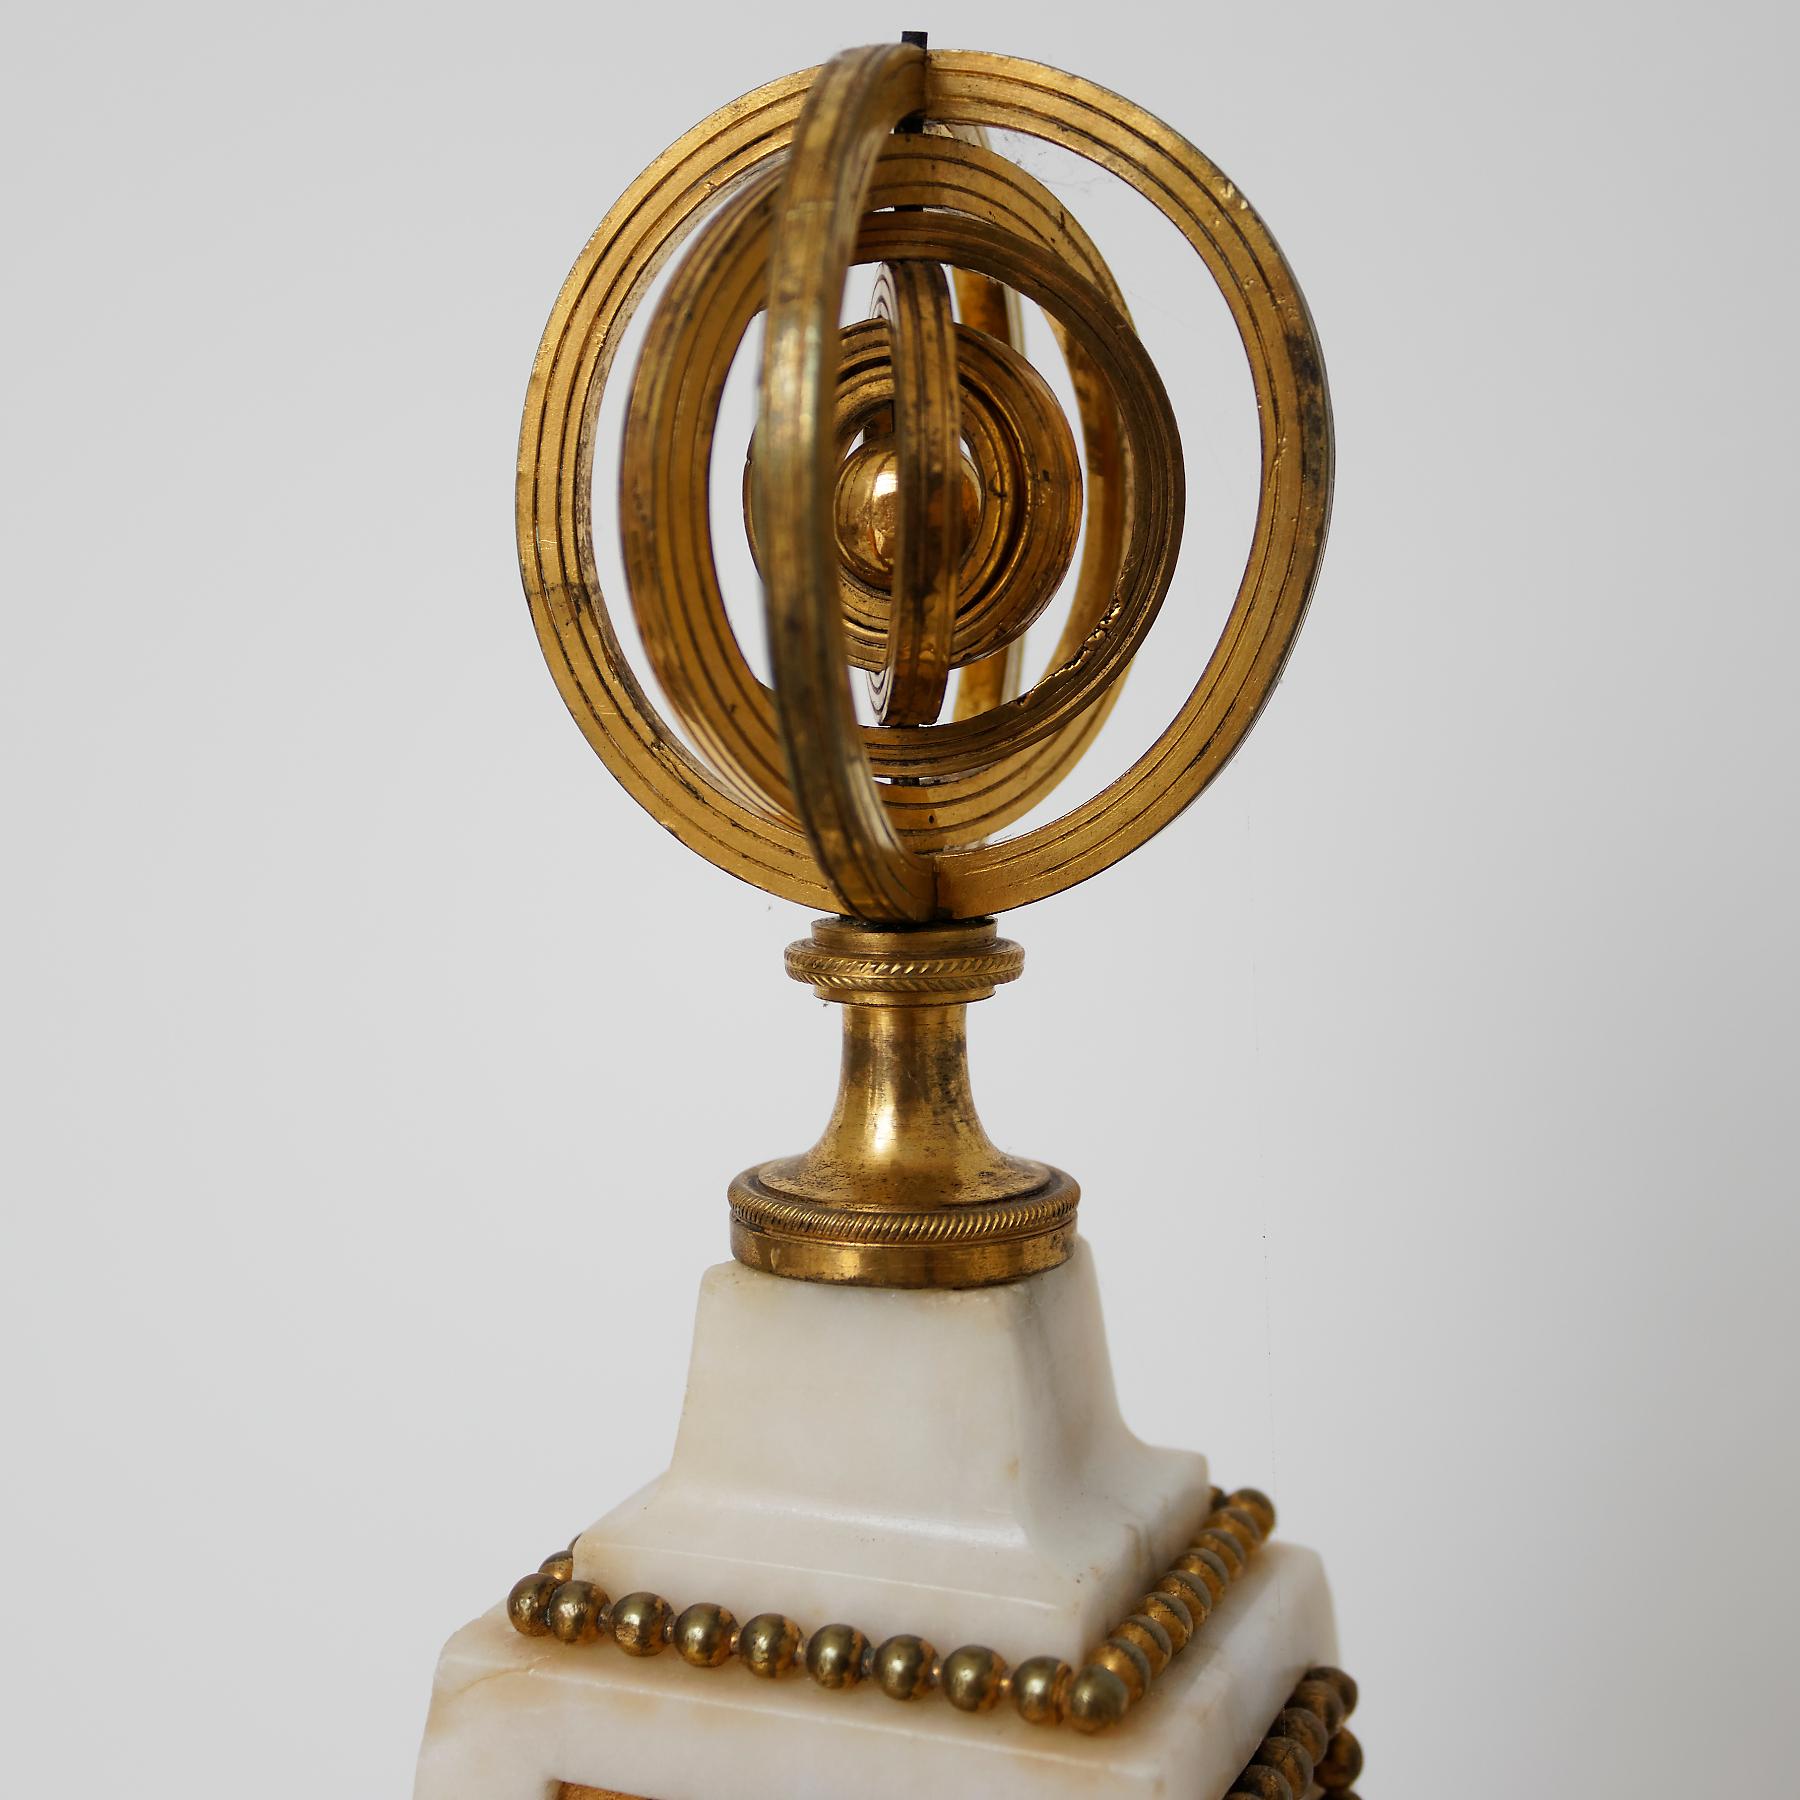 Signed: Joseph Gay Horloger du Roy A Turin

The movement is contained in a white marble obelisk which is surmounted by an armillary sphere finial. The front with a panel chased with nymphs supporting a globe with Cupid standing on top; below are